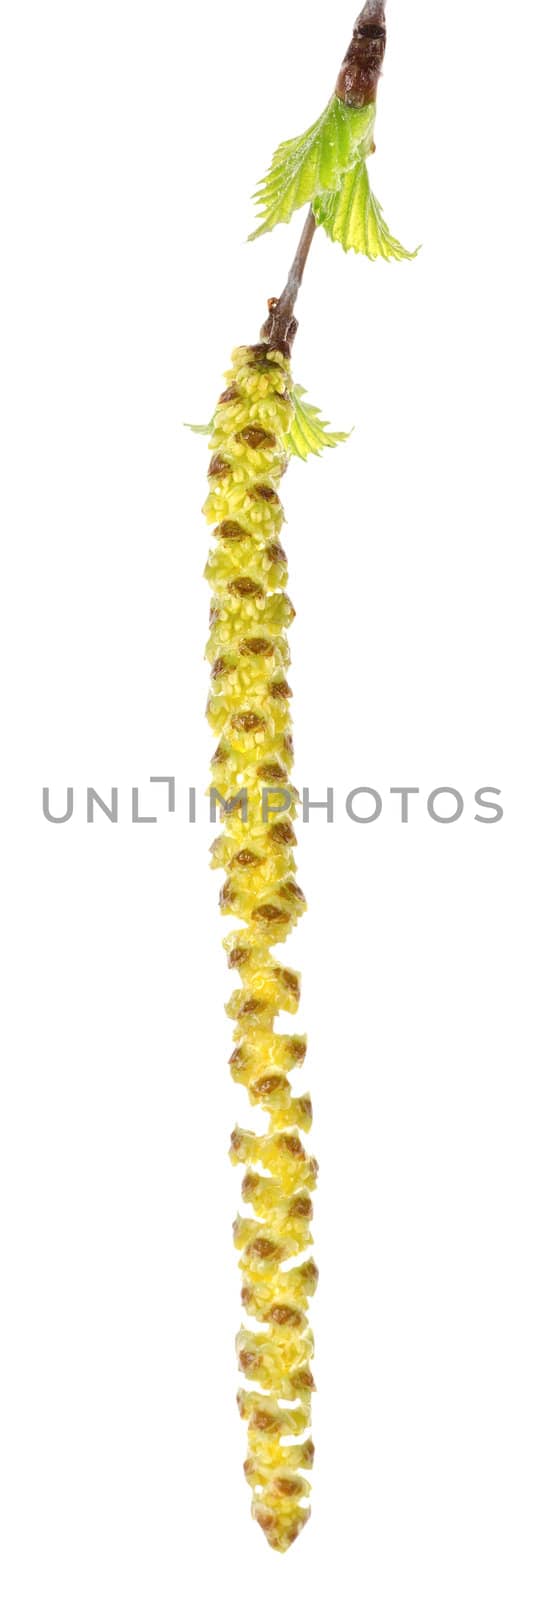 Bud of birch with leaves isolated on a white background